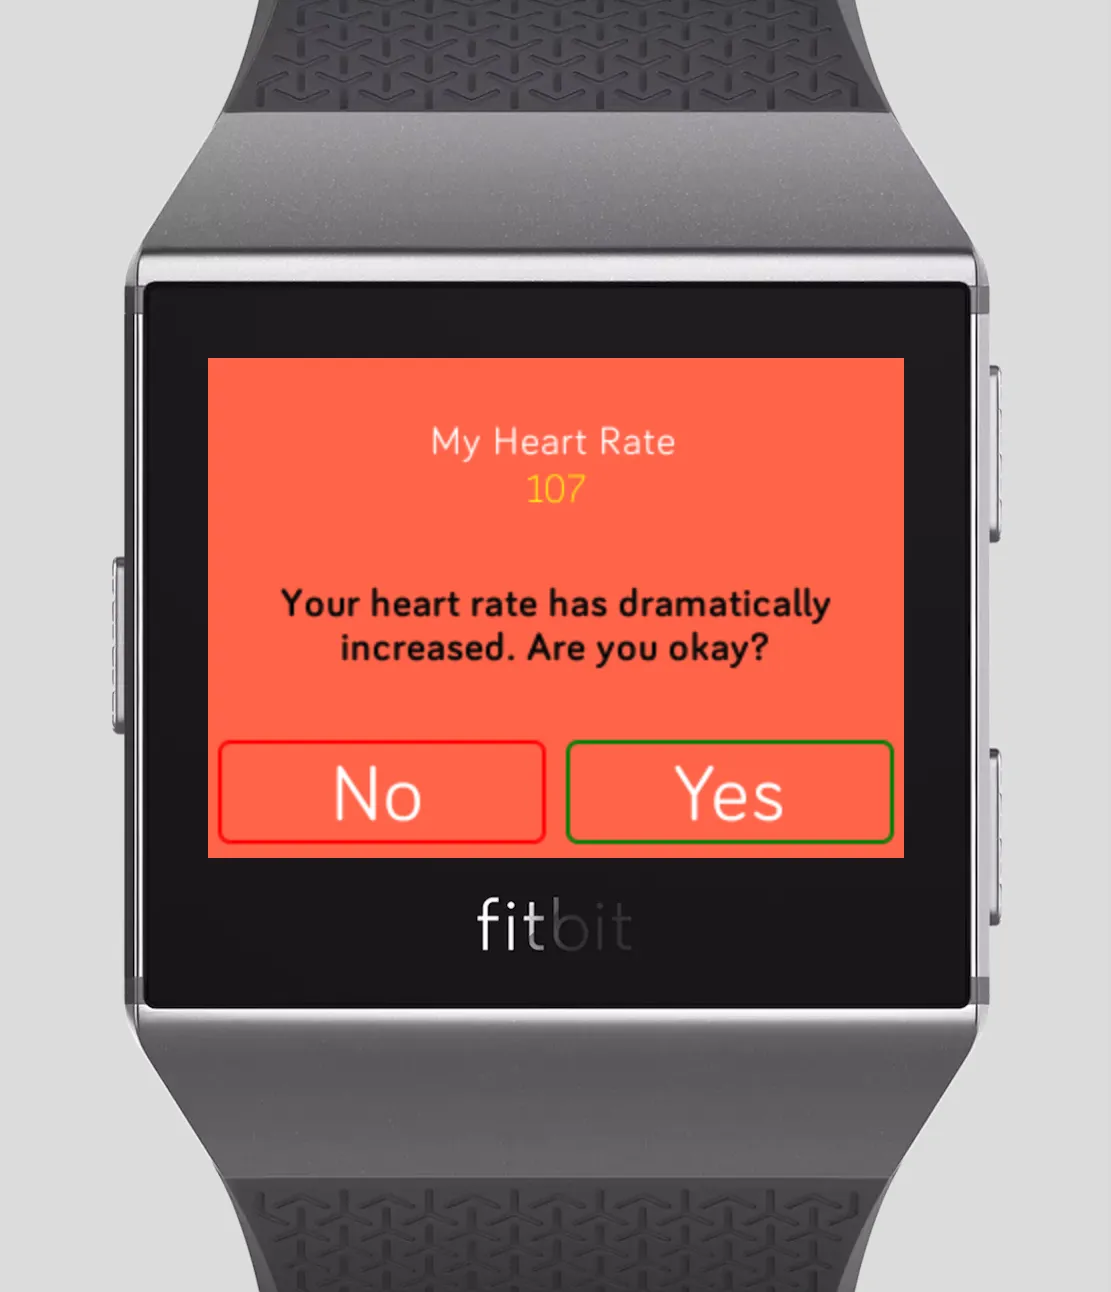 A dramatic increase in heart rate, a common symptom of withdrawal, is detected.